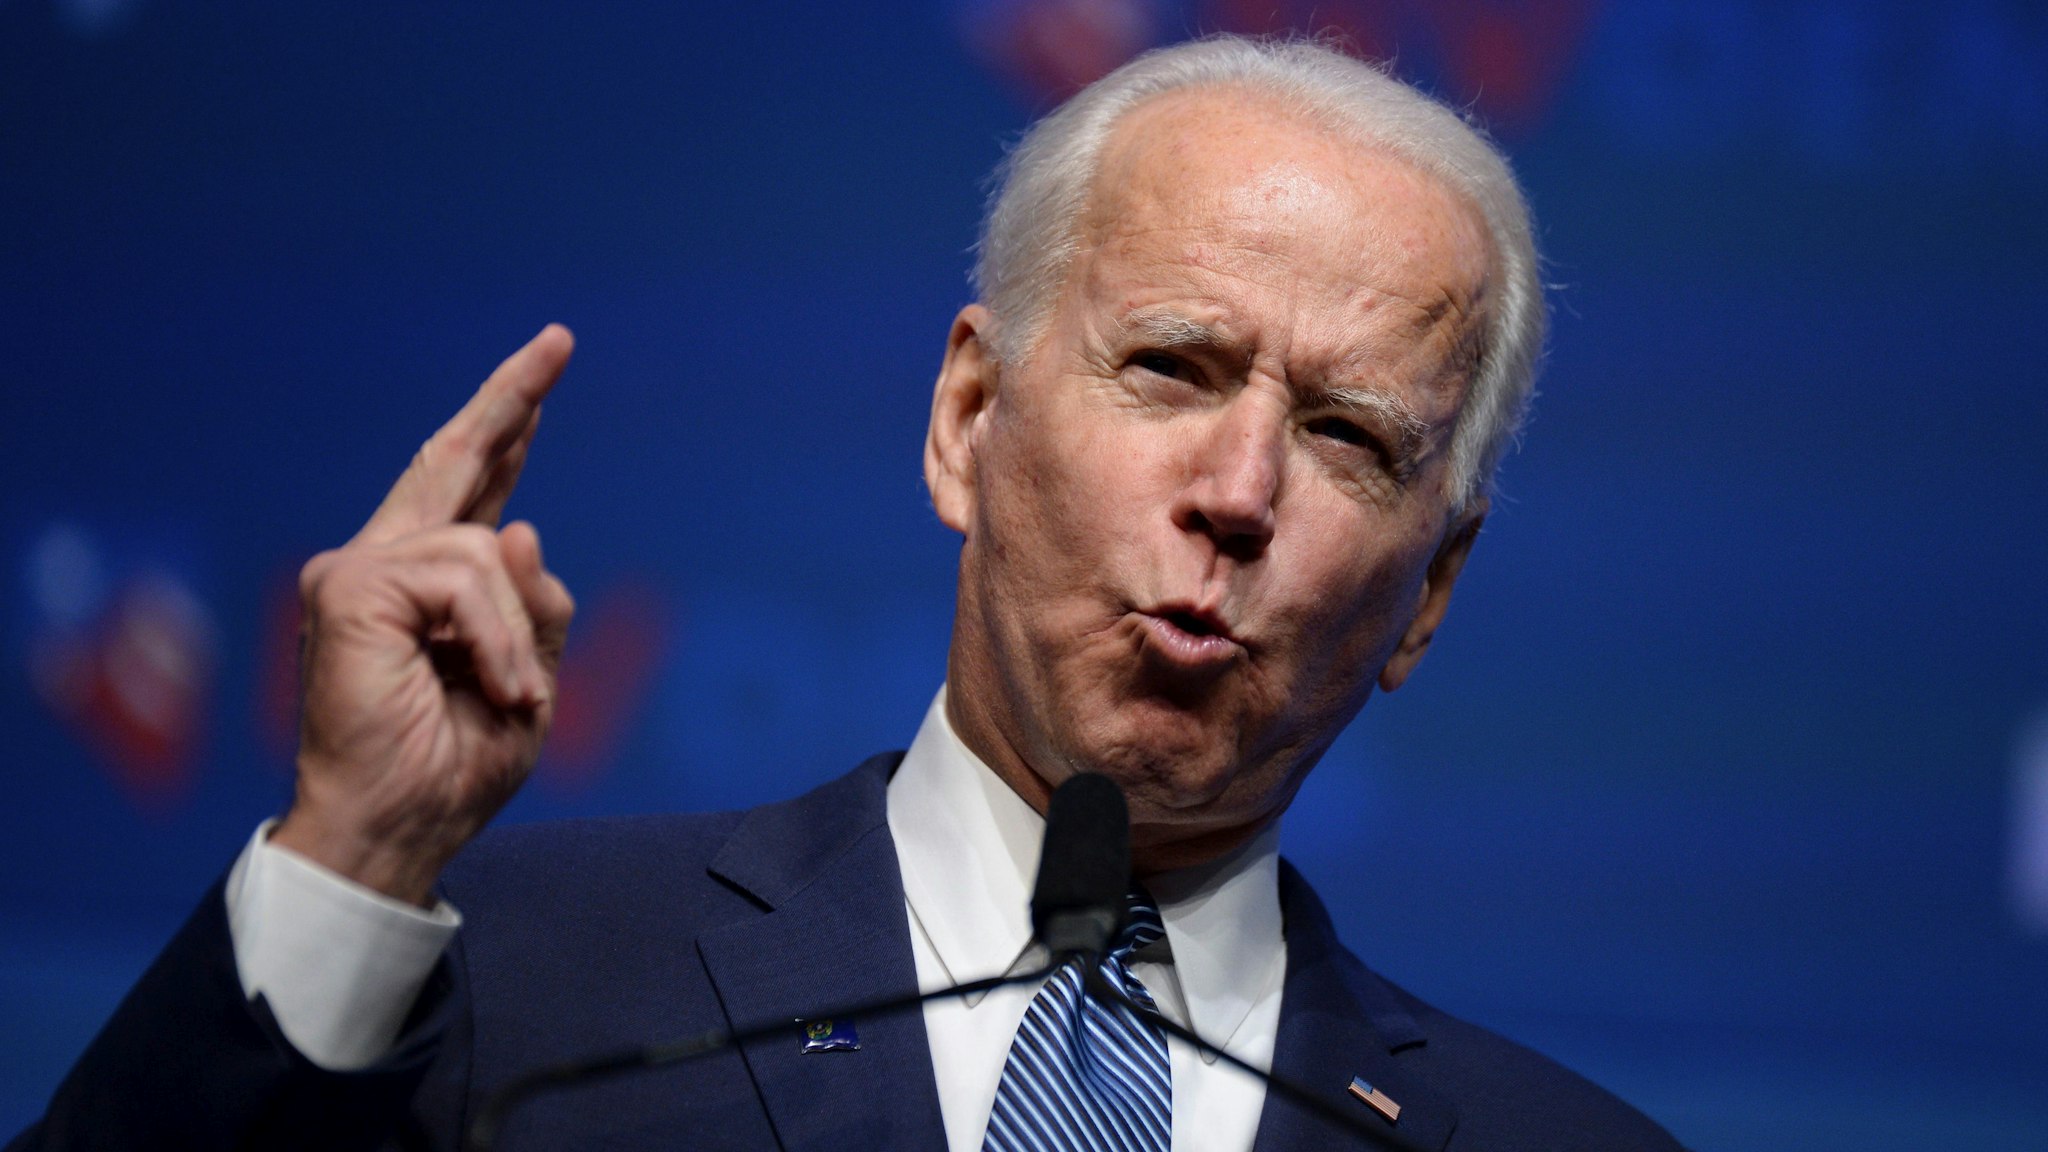 Democratic presidential hopeful former Vice President Joe Biden speaks on stage at "First in the West" event in Las Vegas, Nevada on November 17, 2019.